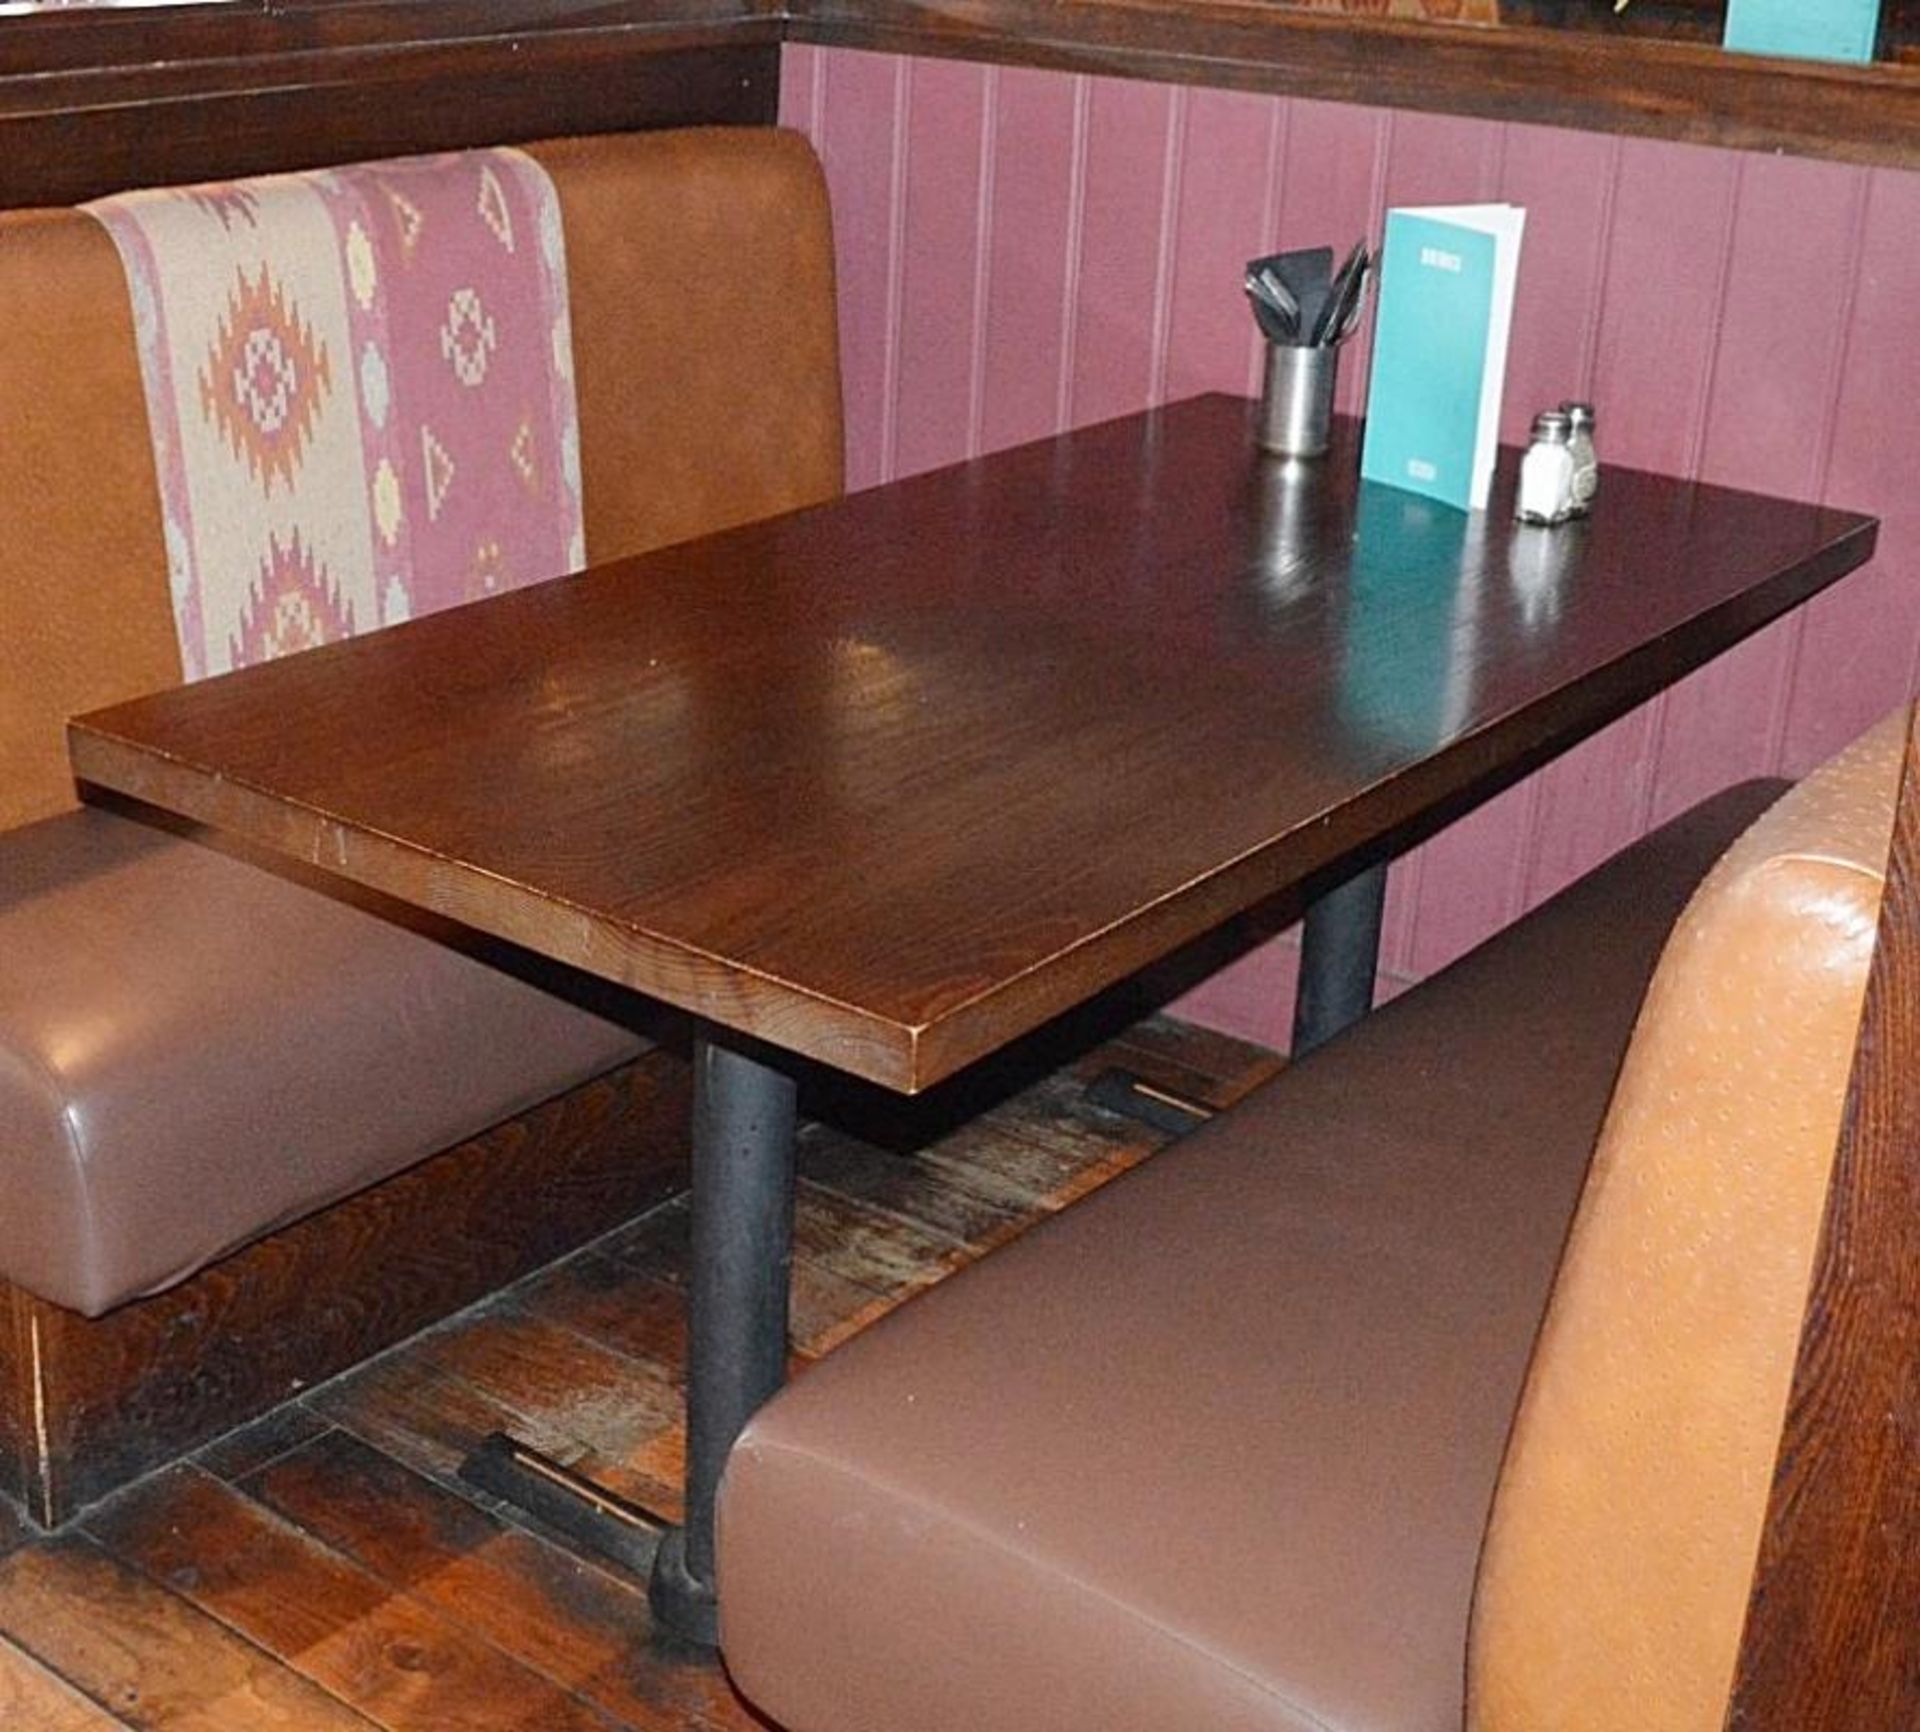 5 x Medium Wood Topped Bistro Tables With Metal Bases - Dimensions: H75 x W117 x D75cm - CL367 - Ref